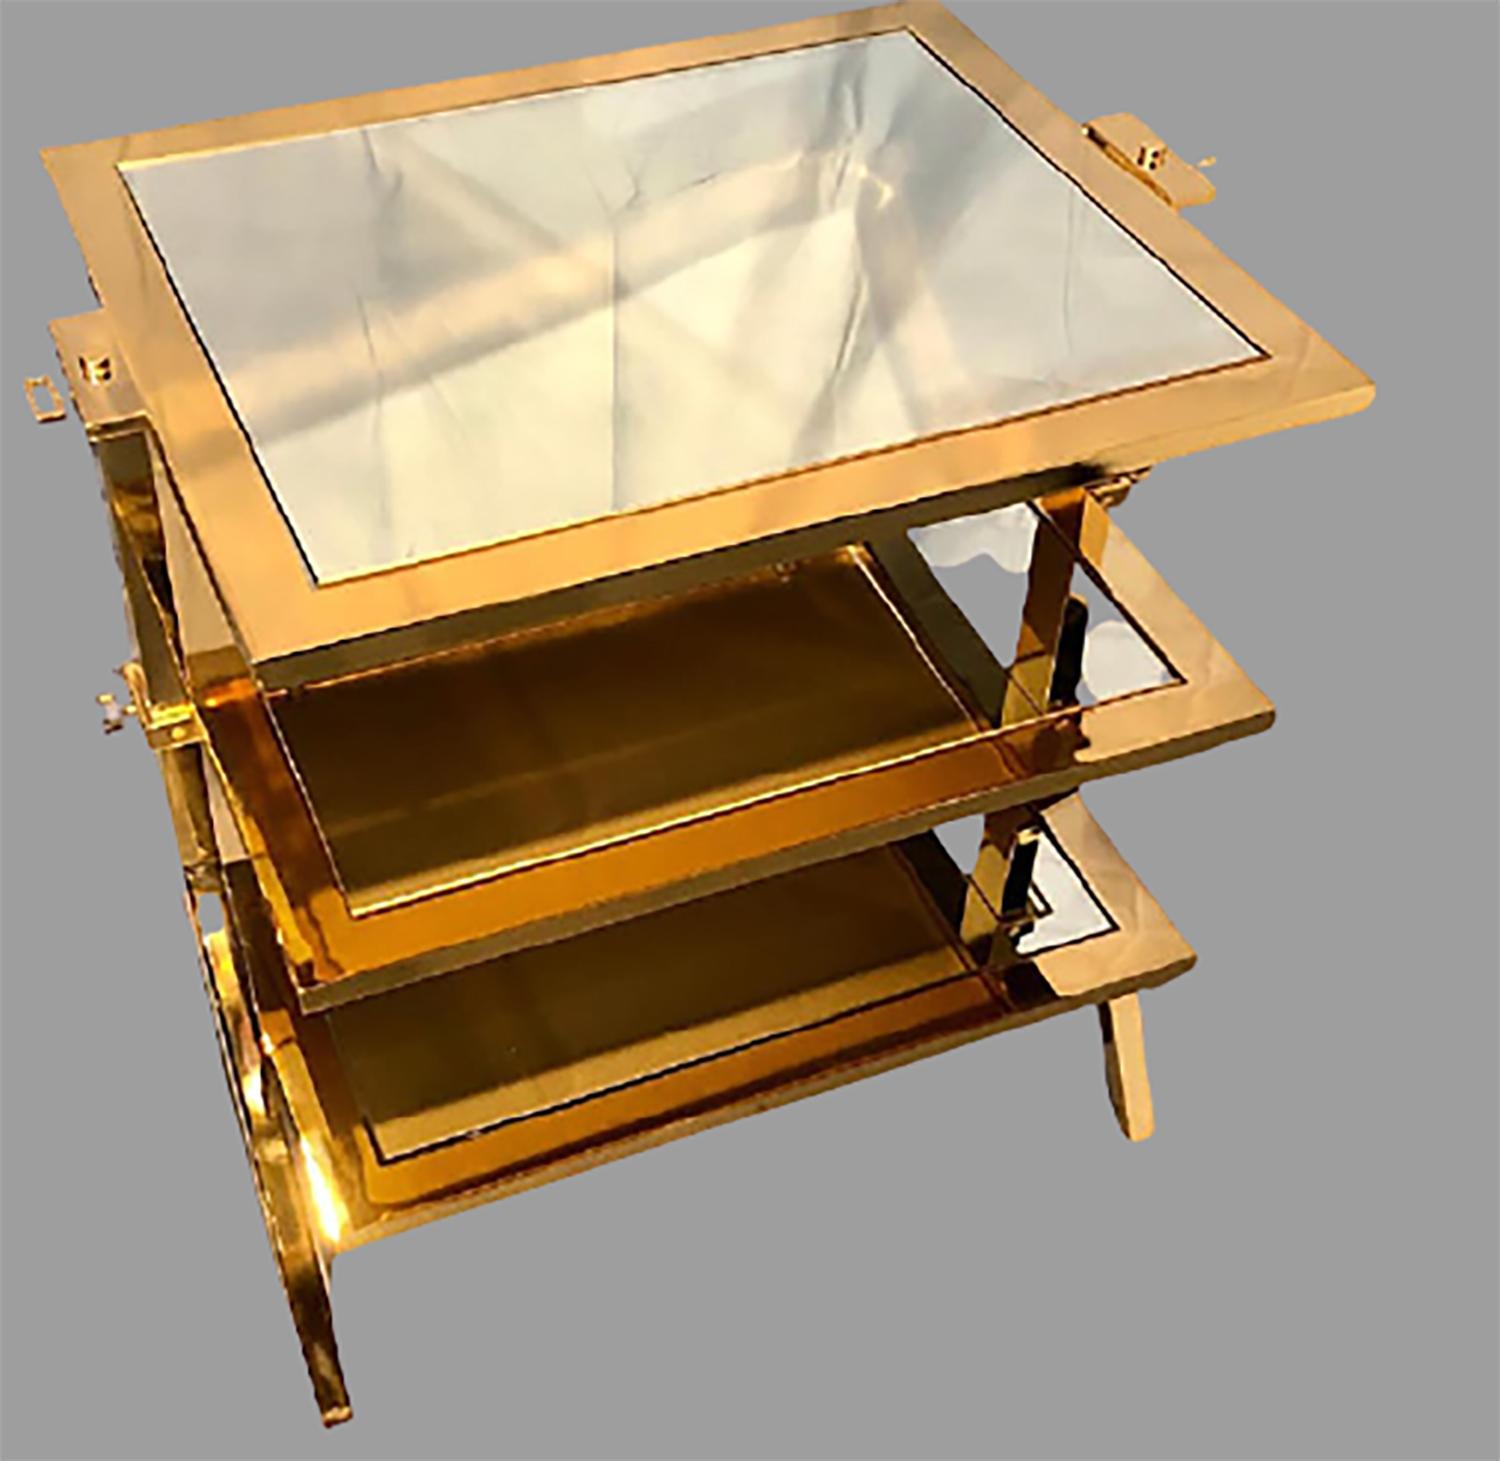 Lorin Marsh design three tiered brass and mirrored glass side table. New York, 2000s. Lacquered brass with mirrored glass. Unsigned.

In 1975, Lorin Marsh established their eponymous furniture and decor showroom in the historic New York Decoration